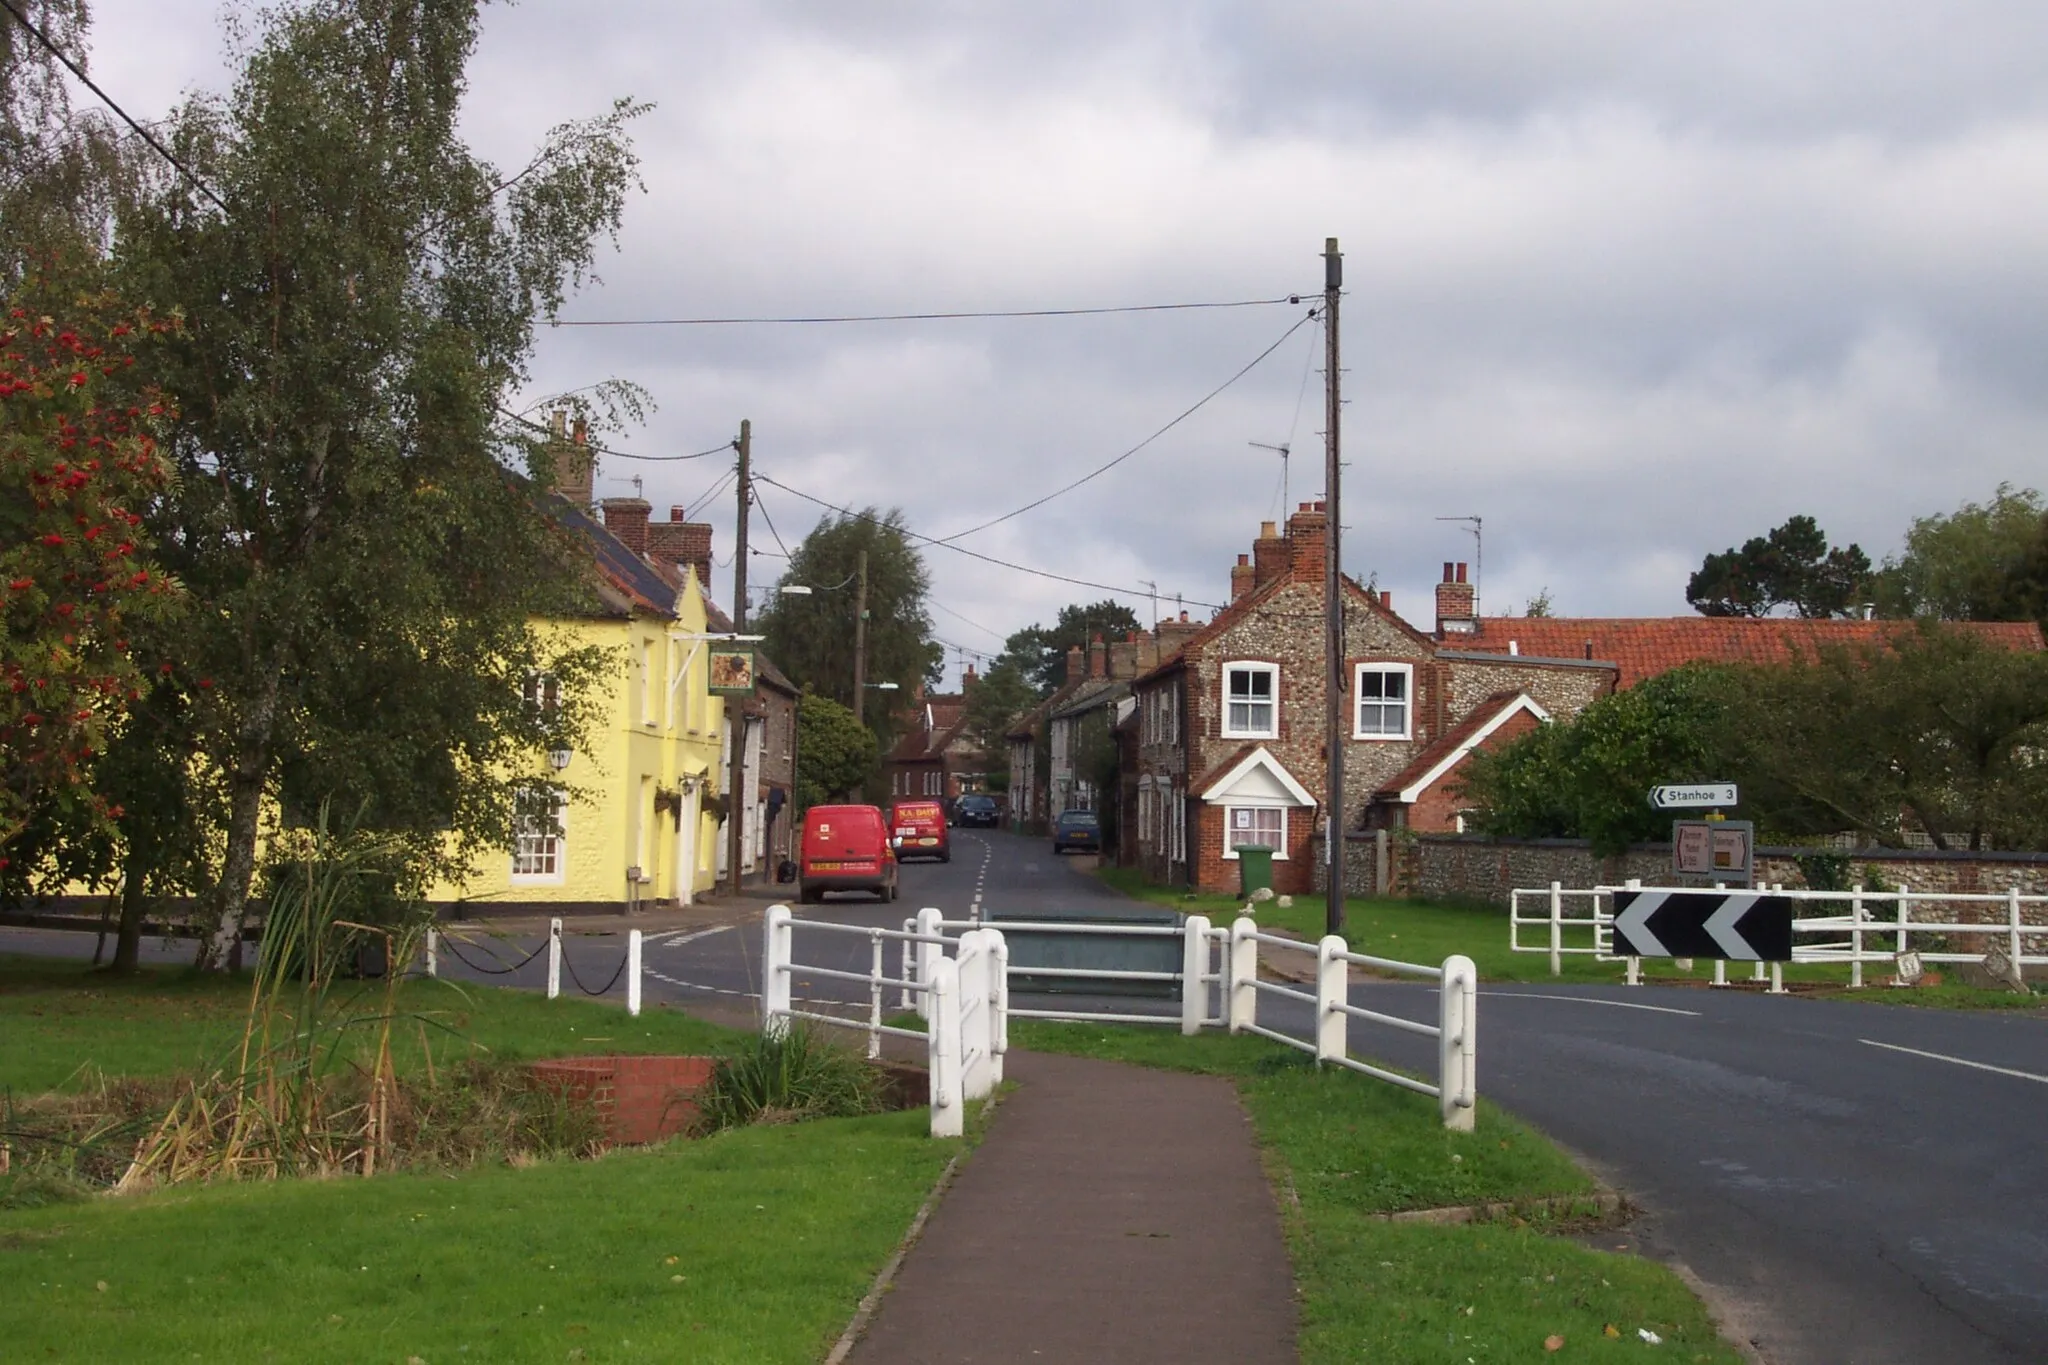 Photo showing: The village of North Creake in the English county of Norfolf. For more information see the Wikipedia article North Creake.